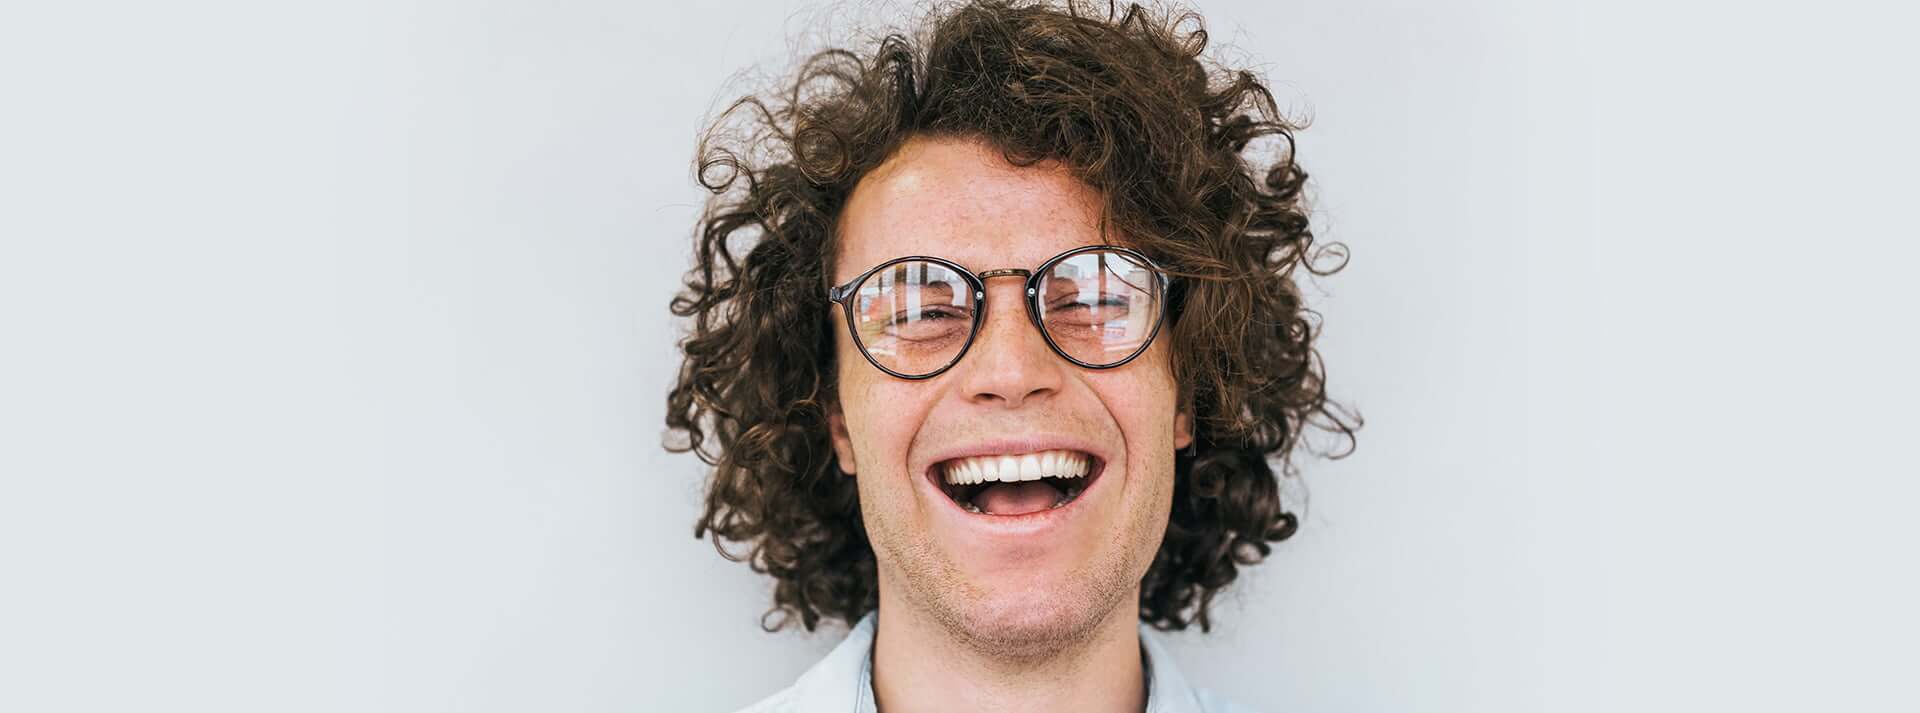 Man with curly hair and glasses laughing